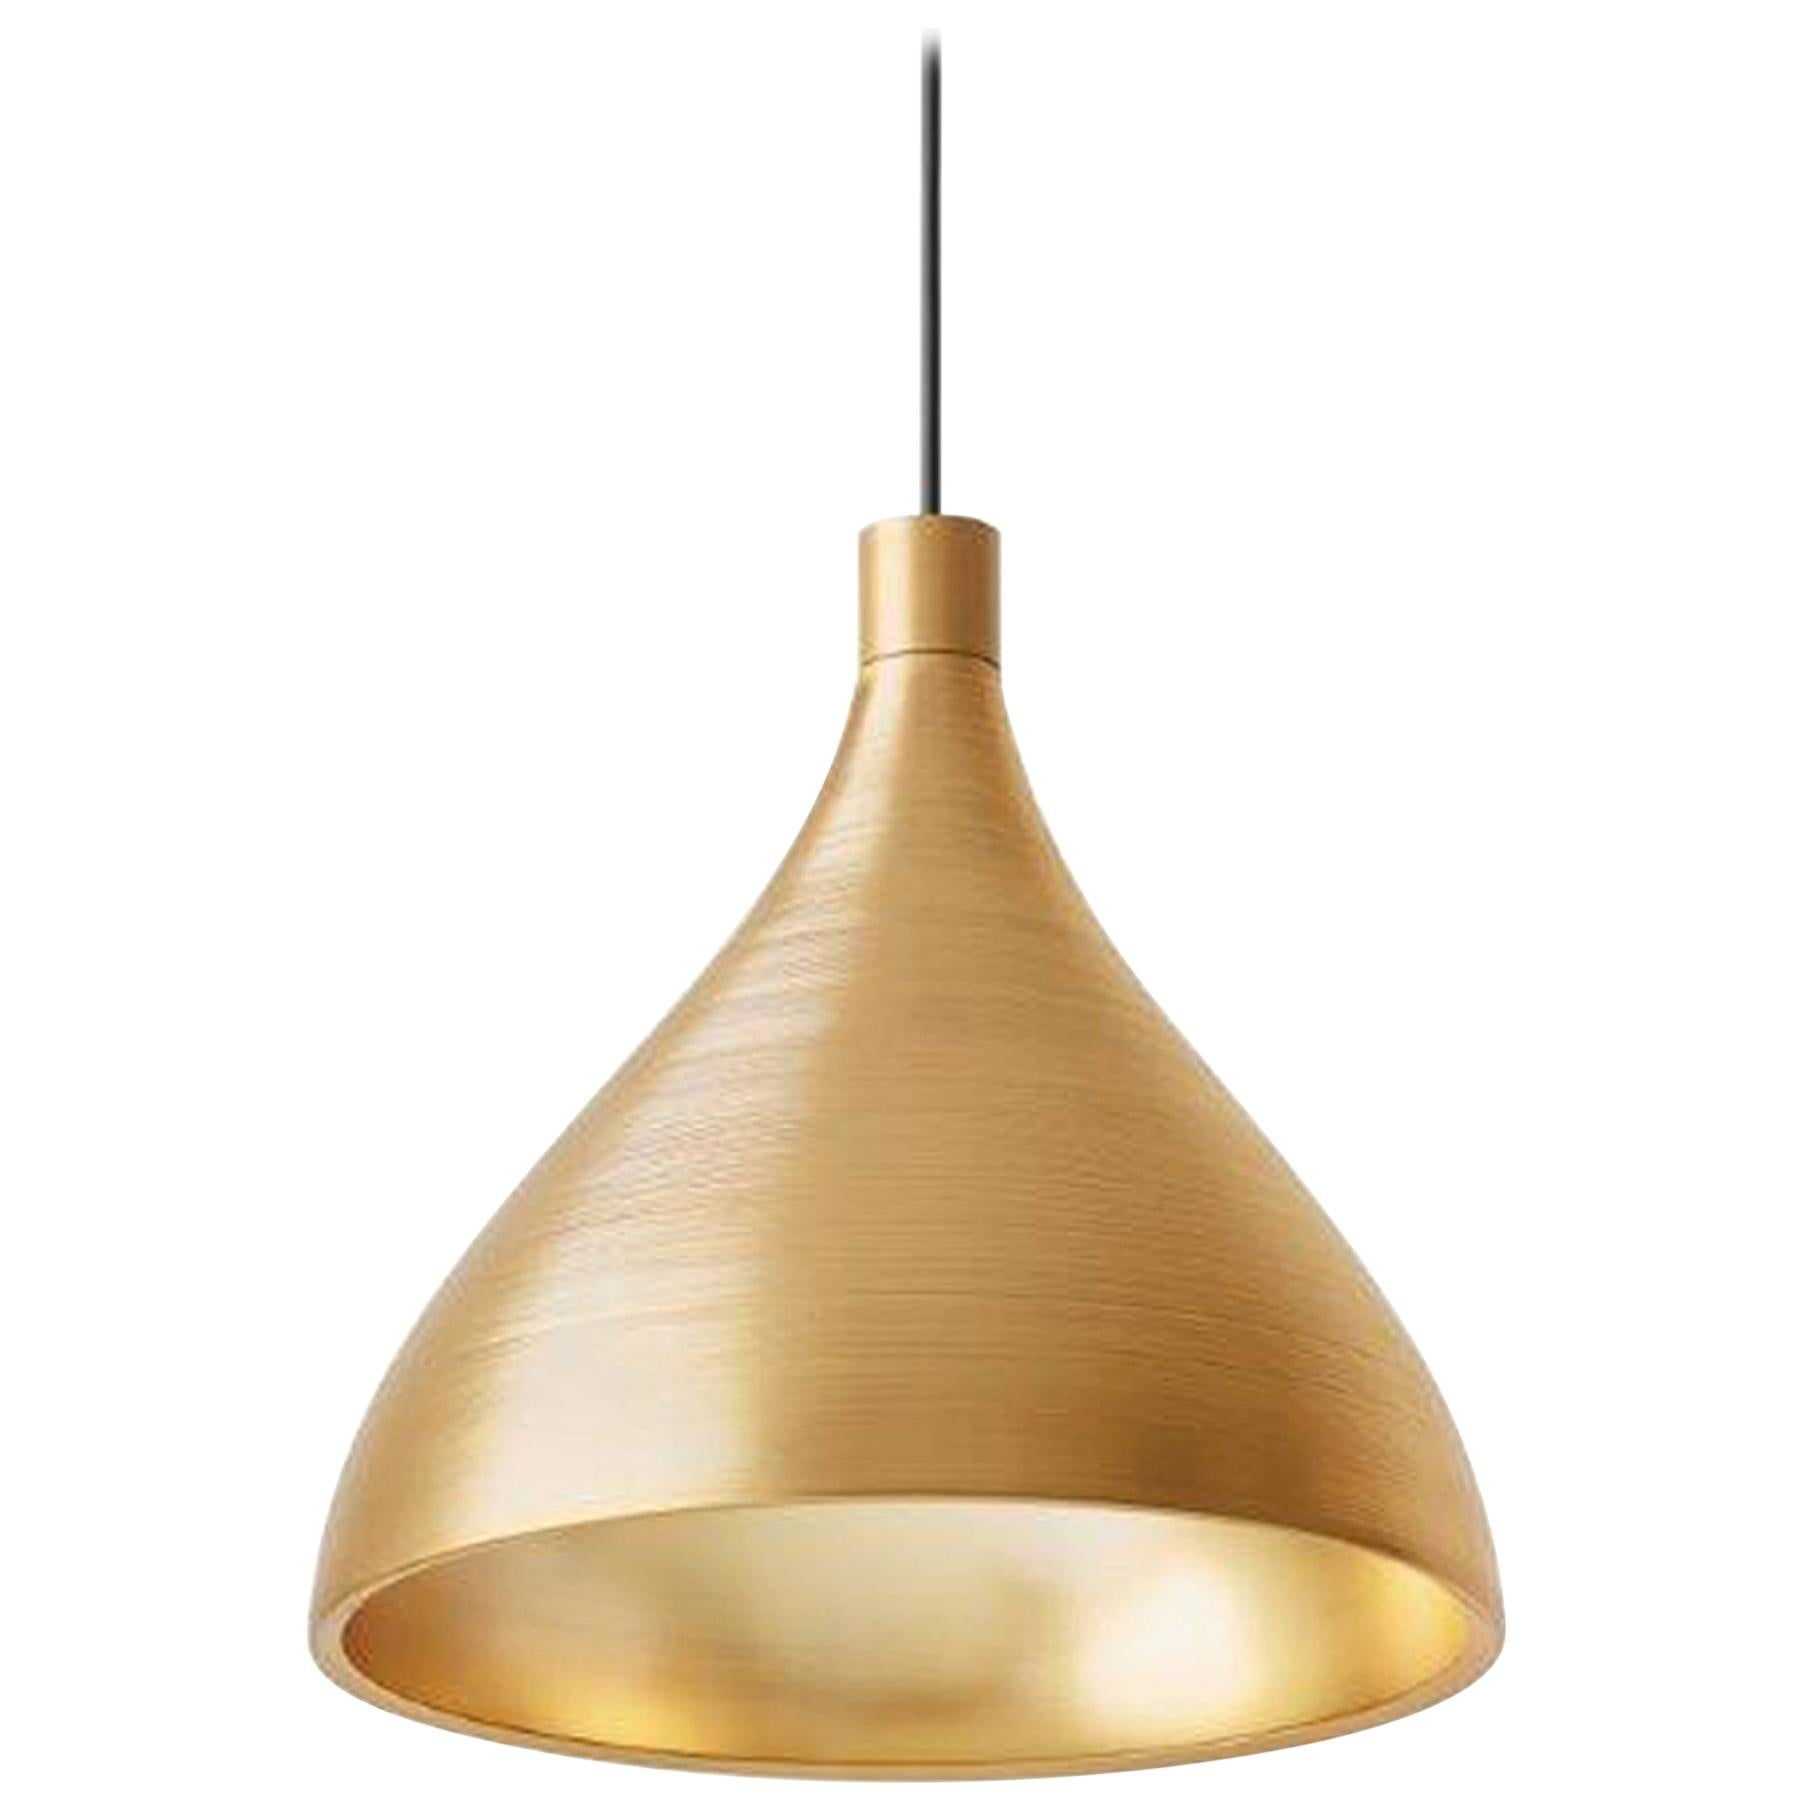 Swell XL Single Medium LED Pendant Lamp in Brass by Pablo Designs For Sale